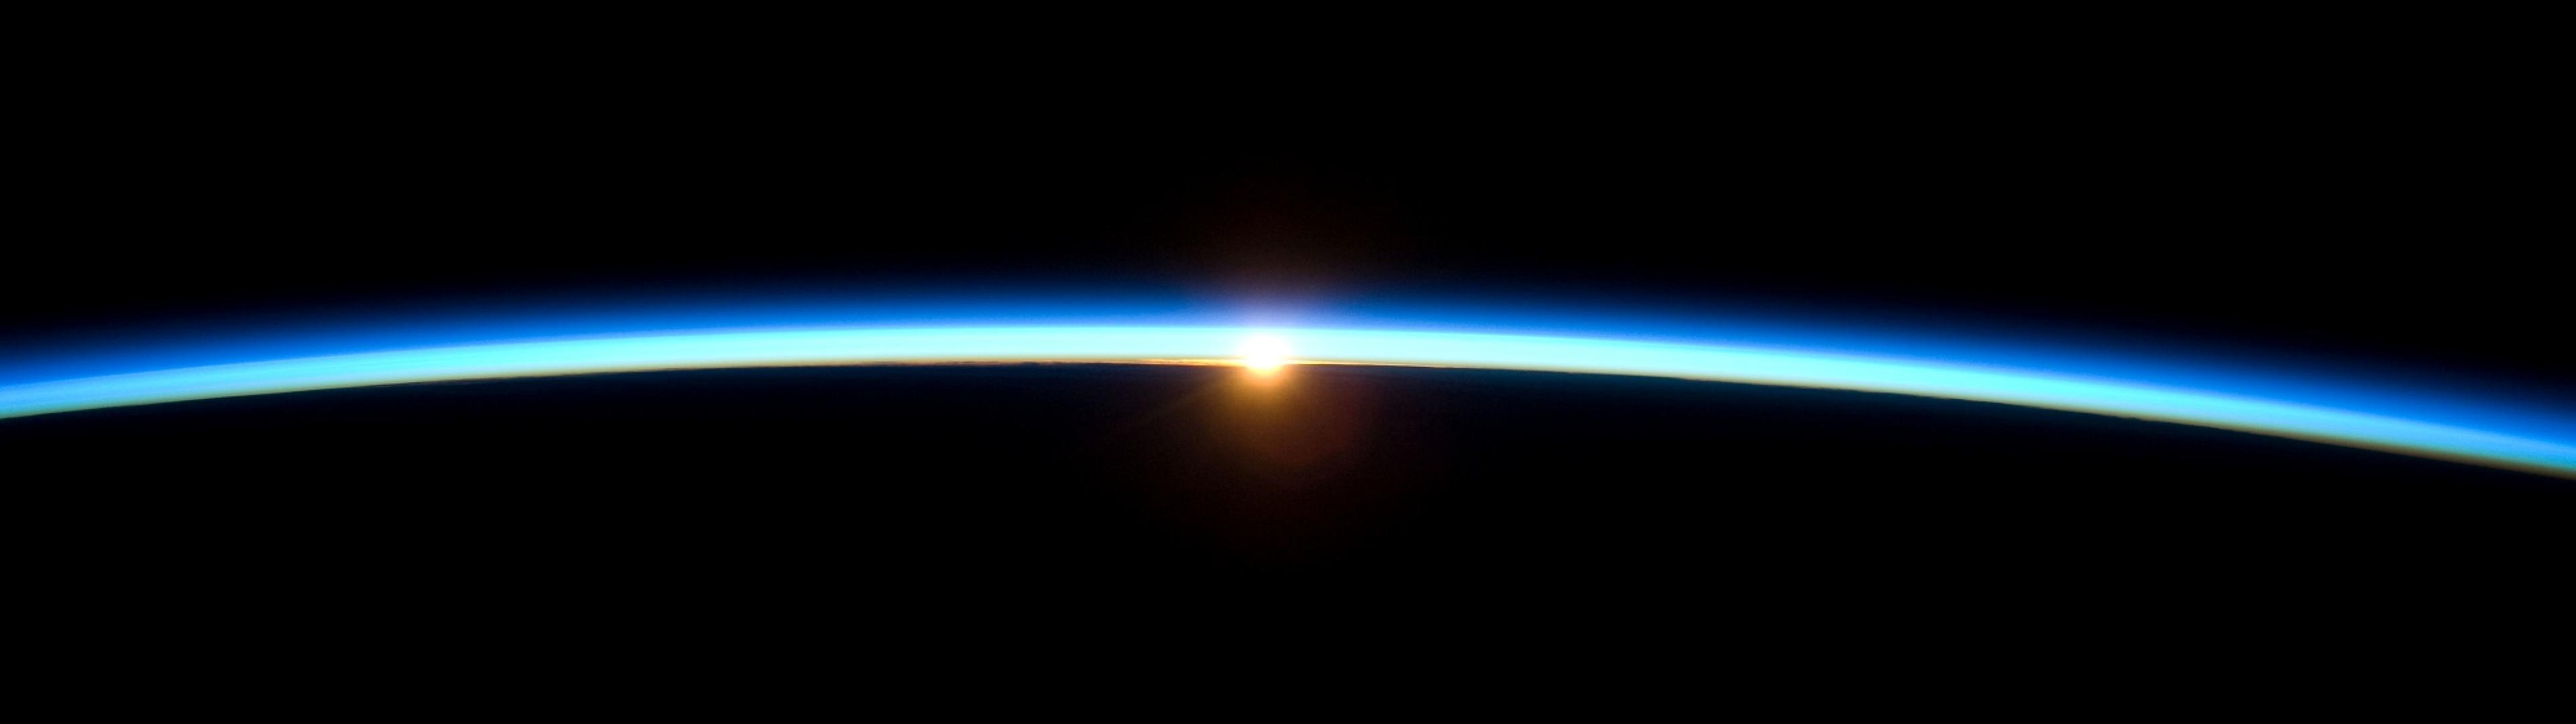 Gpw Nasa Iss021 Sunset Thin Blue Line Of The Atmosphere High